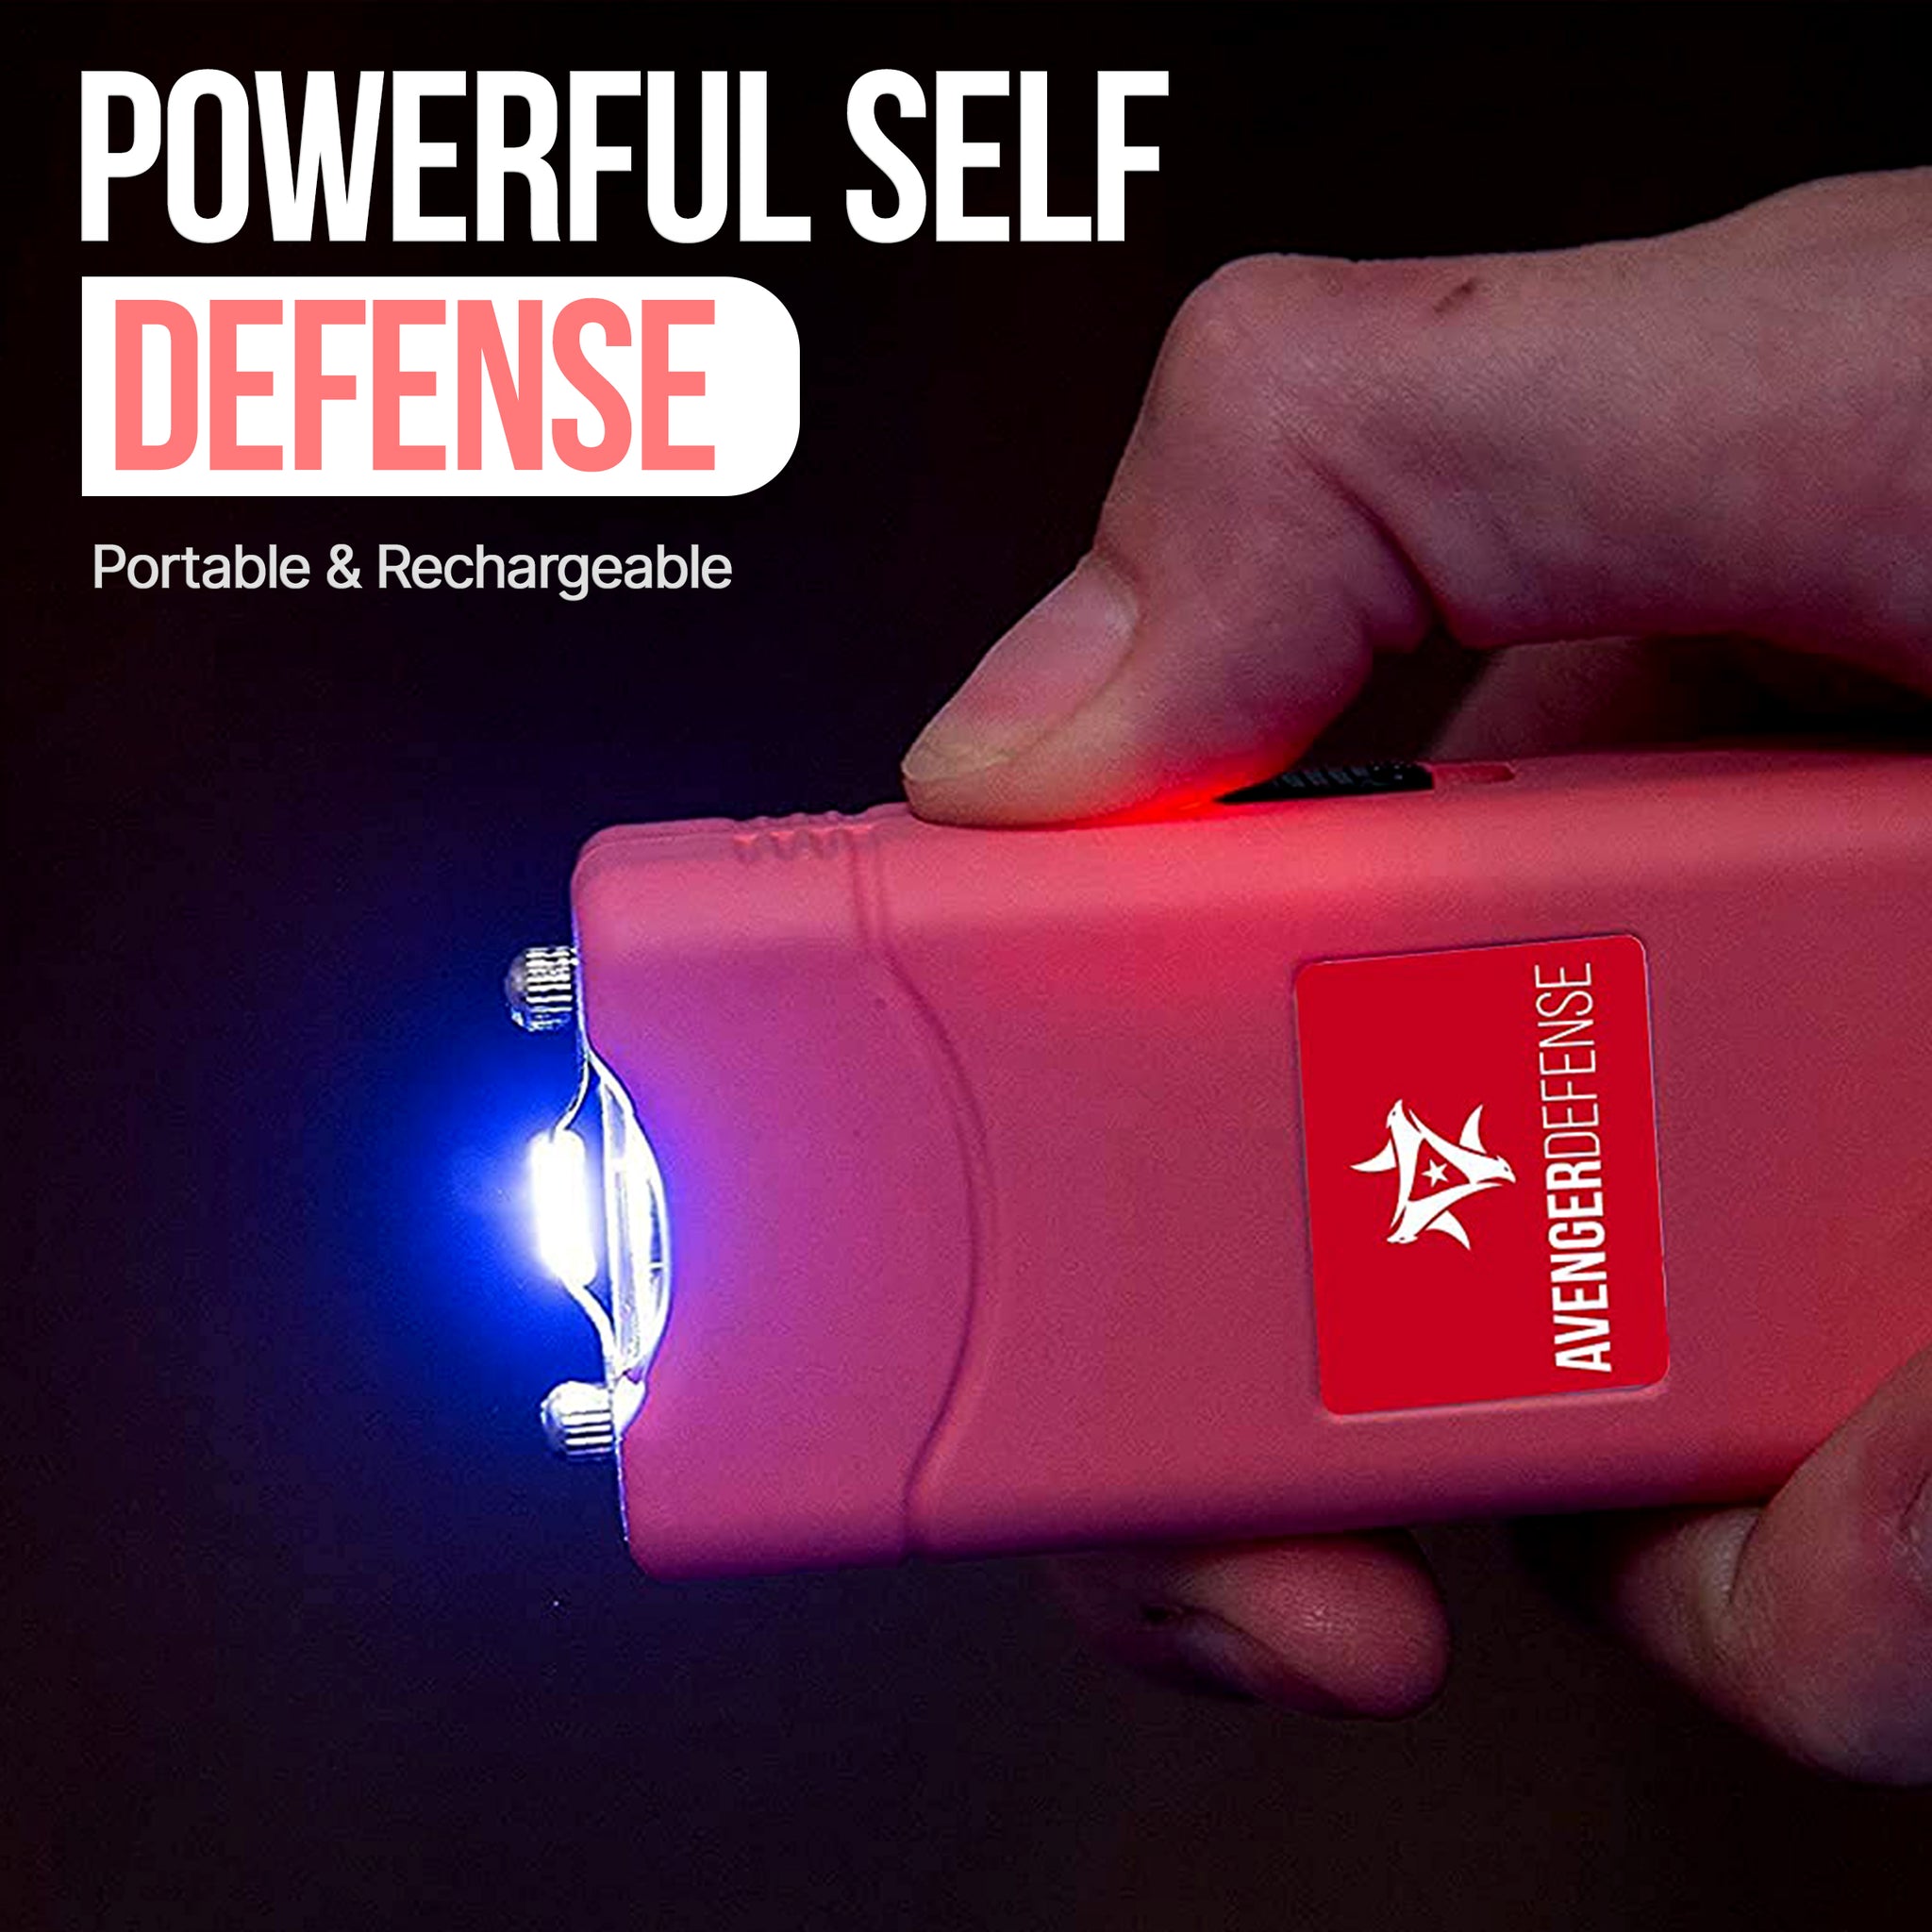 Avenger Defense ADS-50P - Micro Stun Gun Flashlight - Rechargeable 1.25 µC Charge Powerful Self Defense - Ultra Compact Design with Built in Plug, Pink, Blue